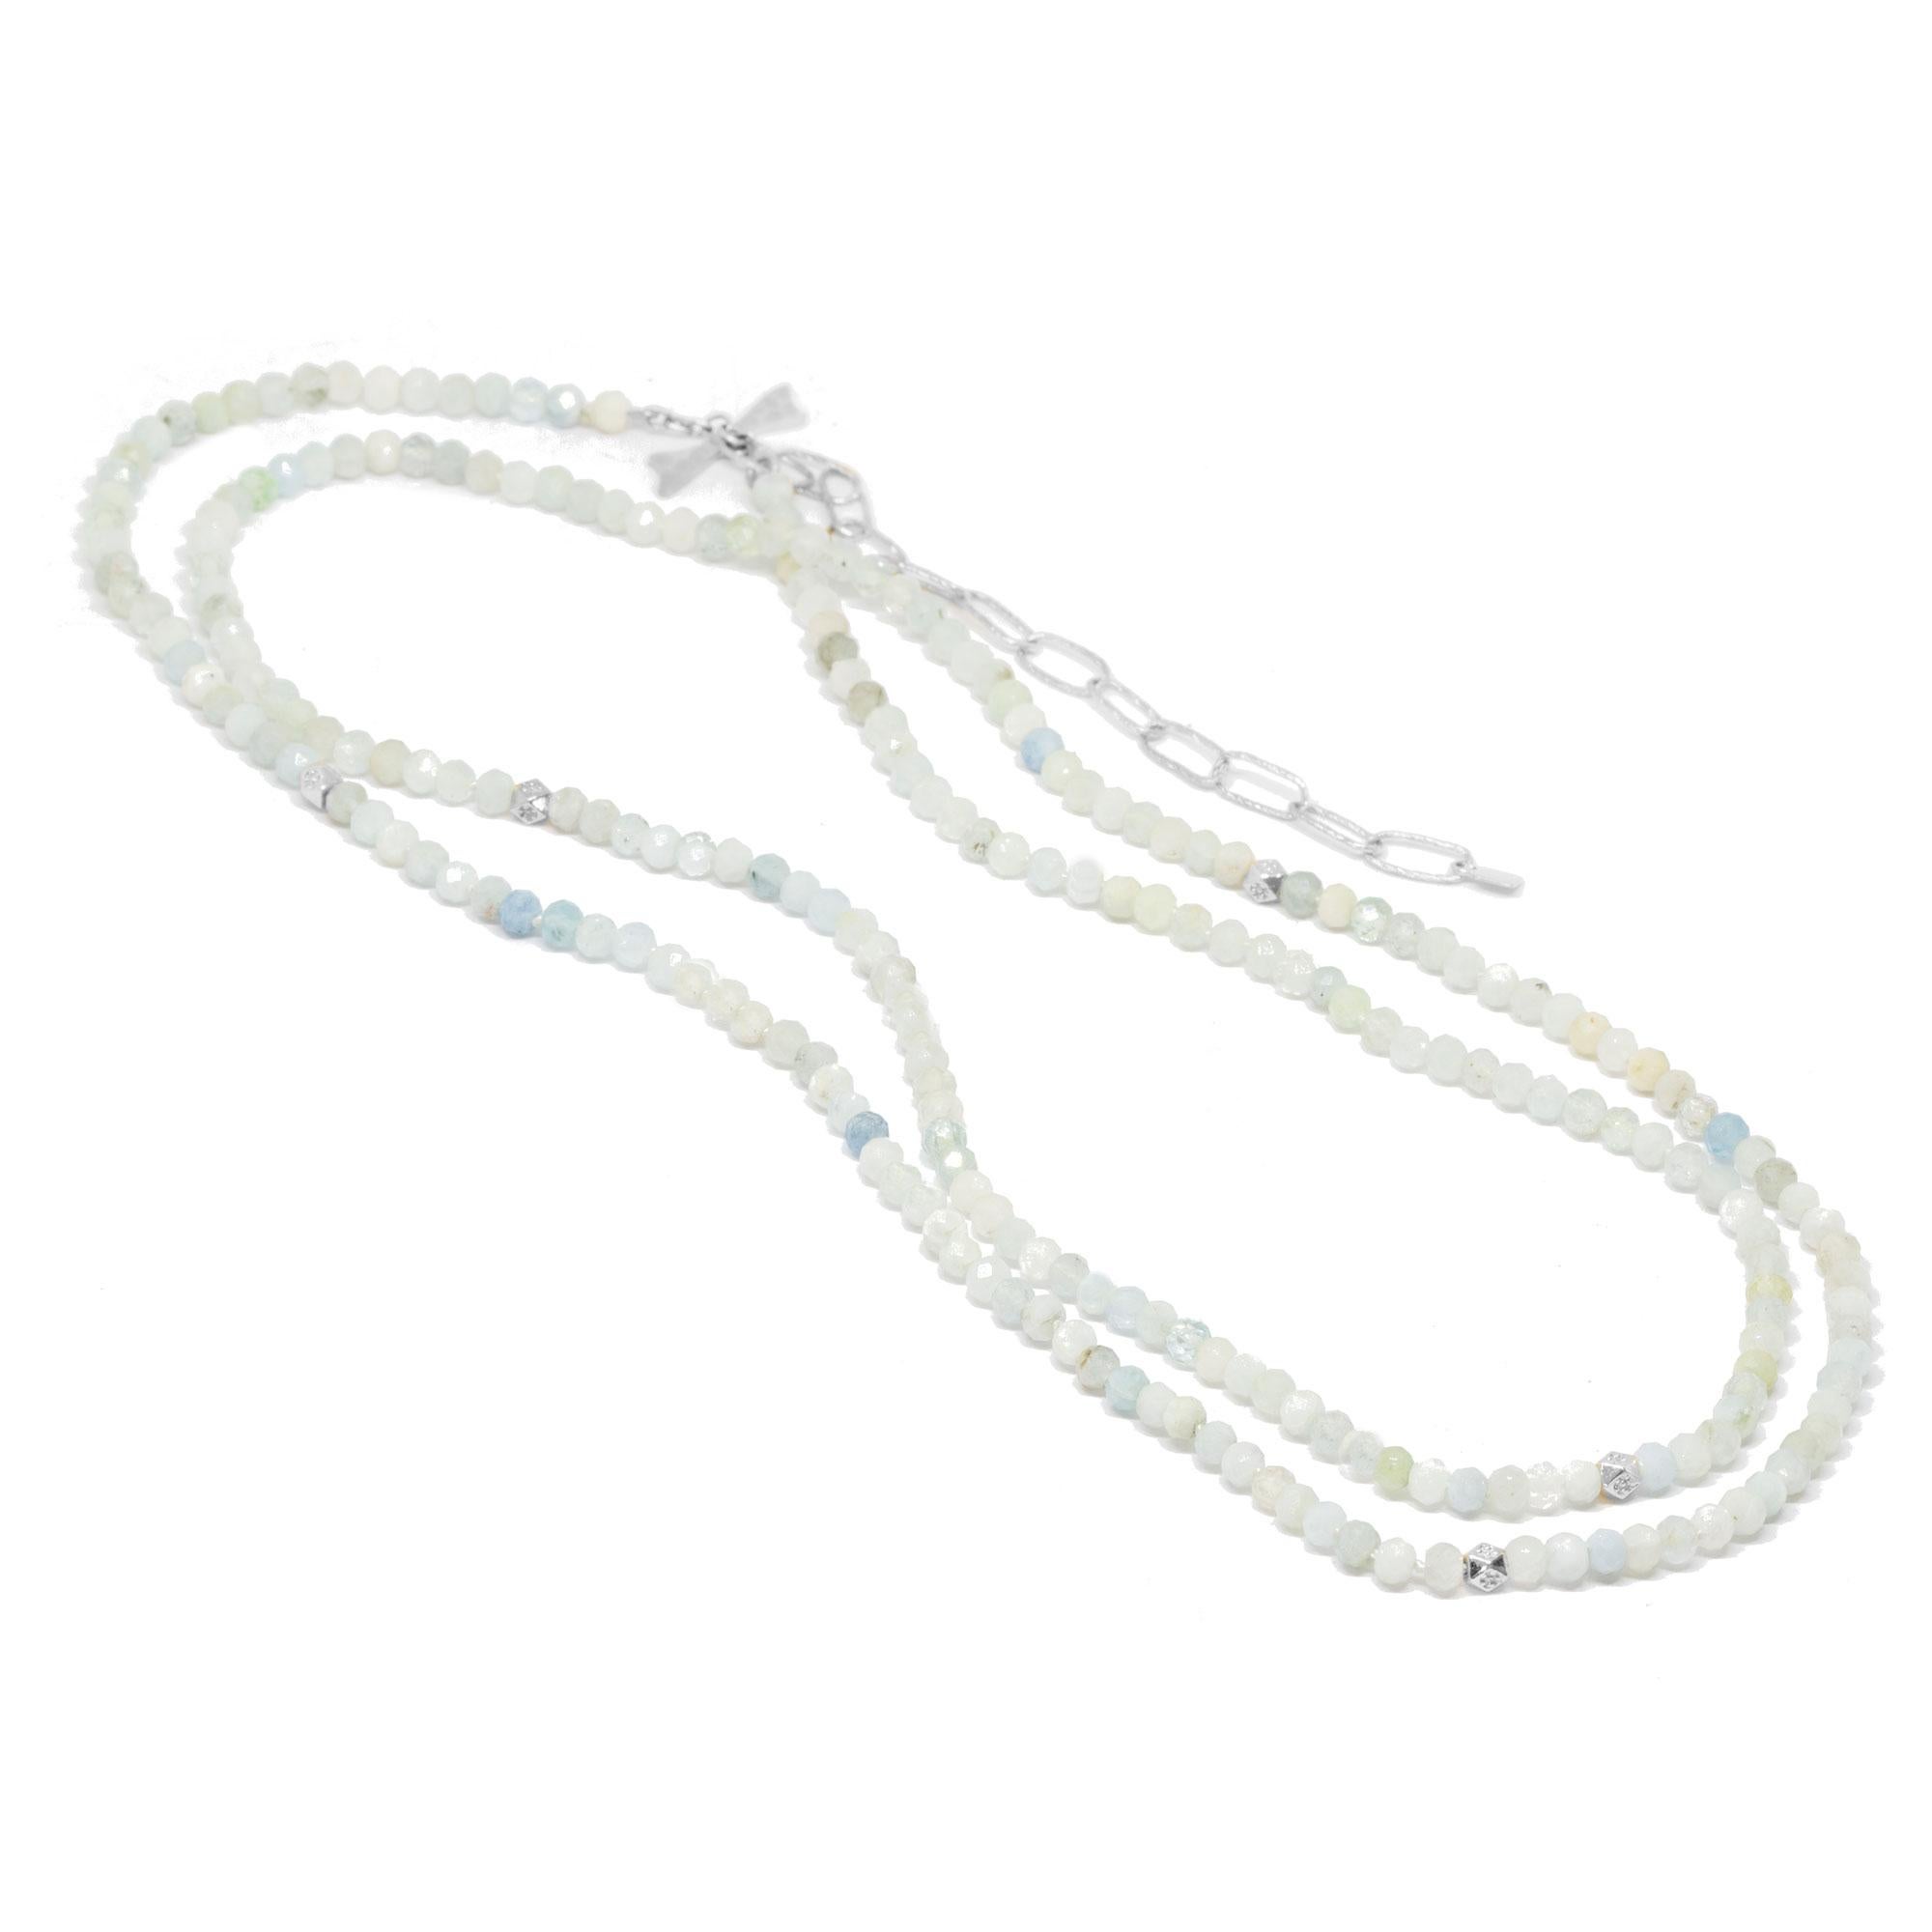 The best part about our Chloe Silver Gemstone Convertable Wrap isn’t just that it can be worn long, doubled-up, or as a wrap bracelet (although that’s pretty cool). It’s that you can thread any of our Charms onto the aquamarine beads—have fun